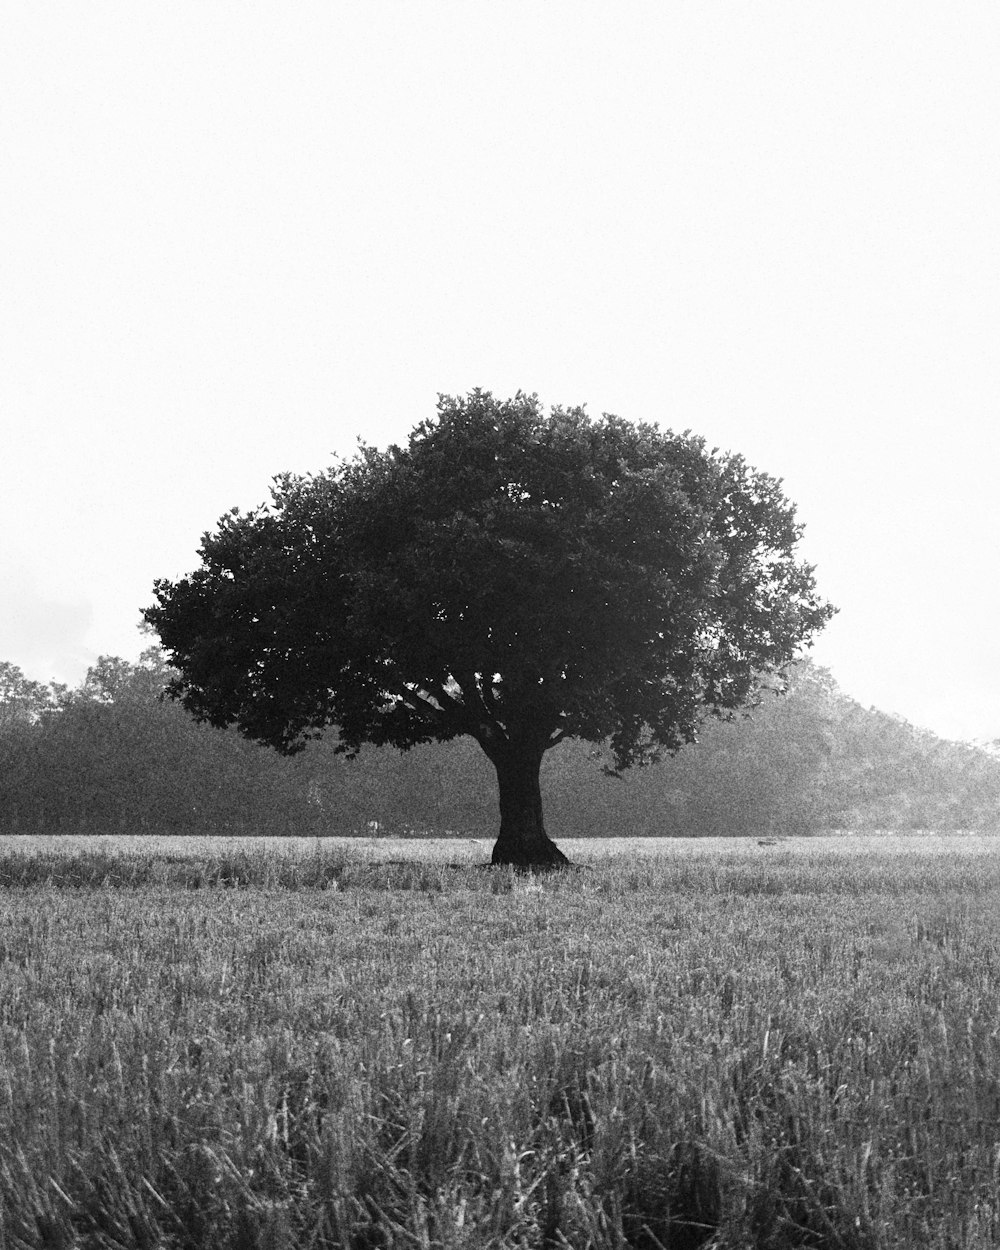 grayscale photo of tree in the middle of grass field